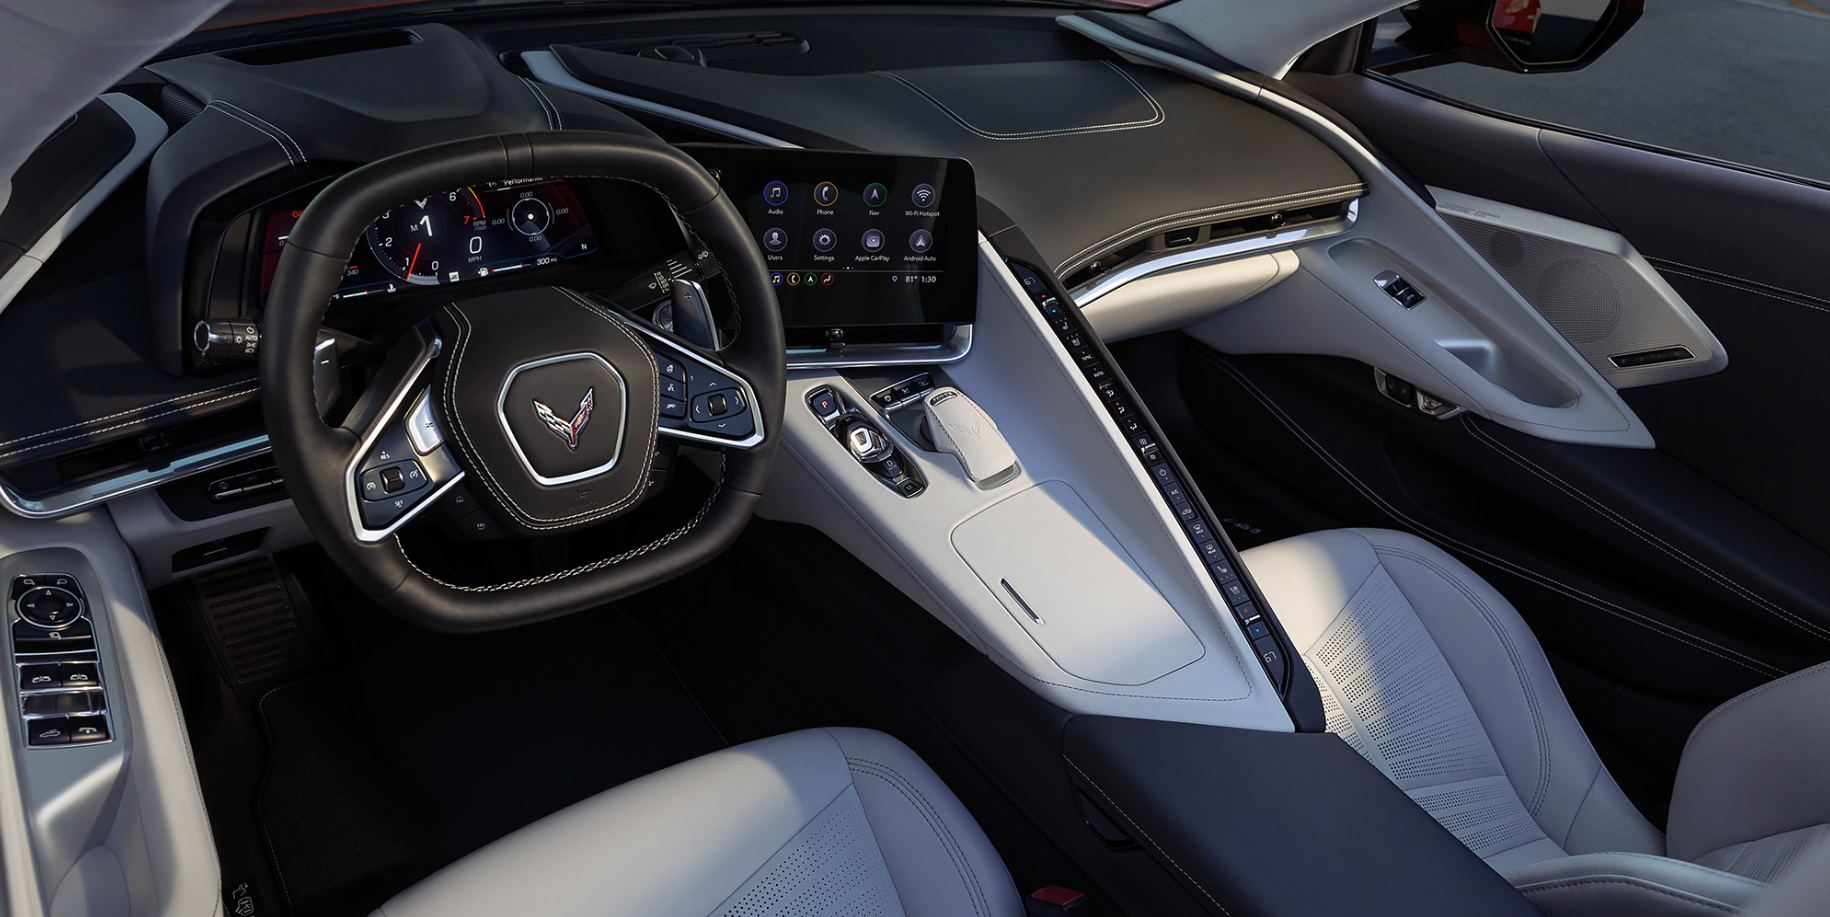 2020 Chevy Corvette Stingray Safety Features | Mike Anderson Chevy  Merrillville